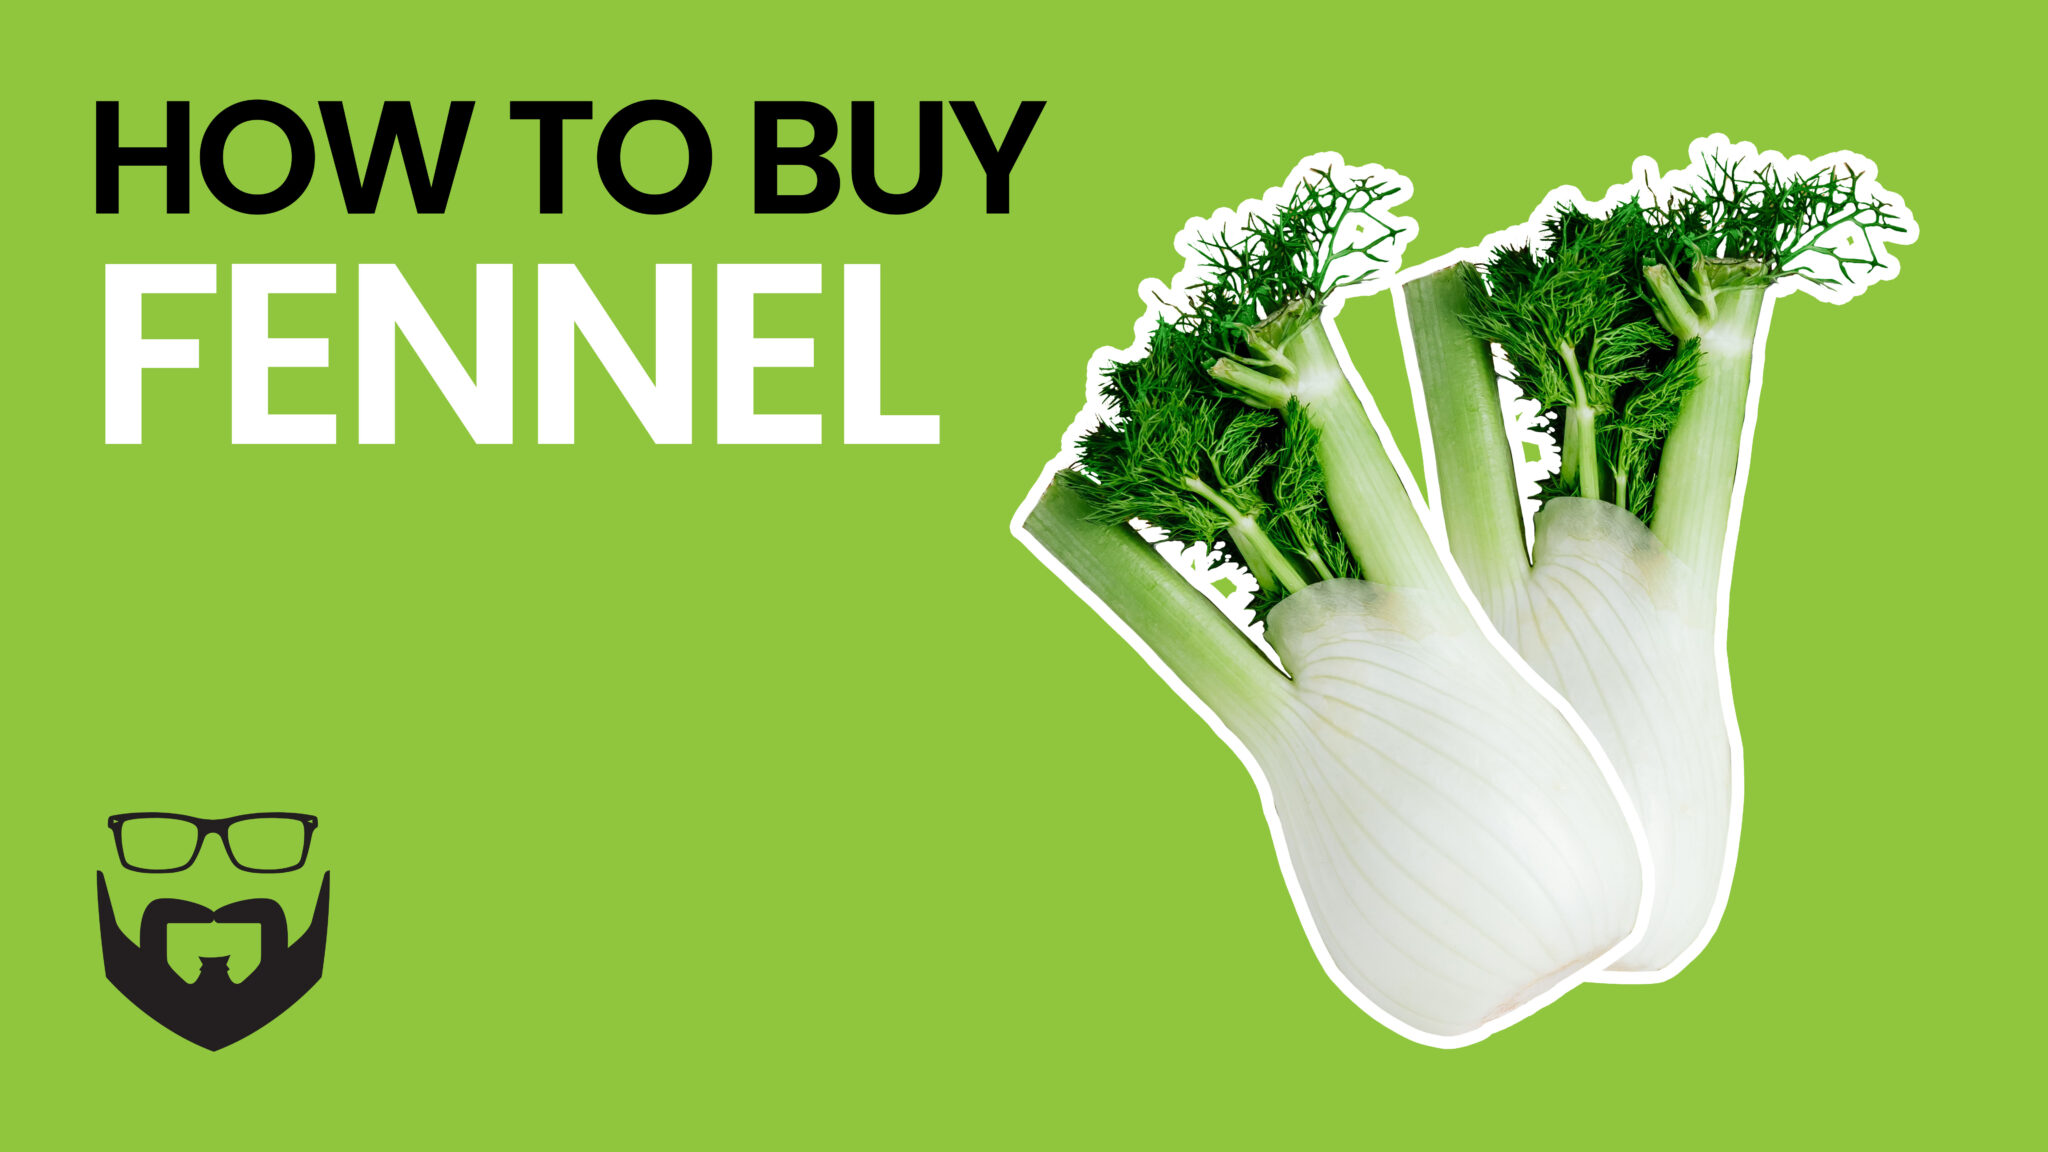 How to Buy Fennel Video - Green